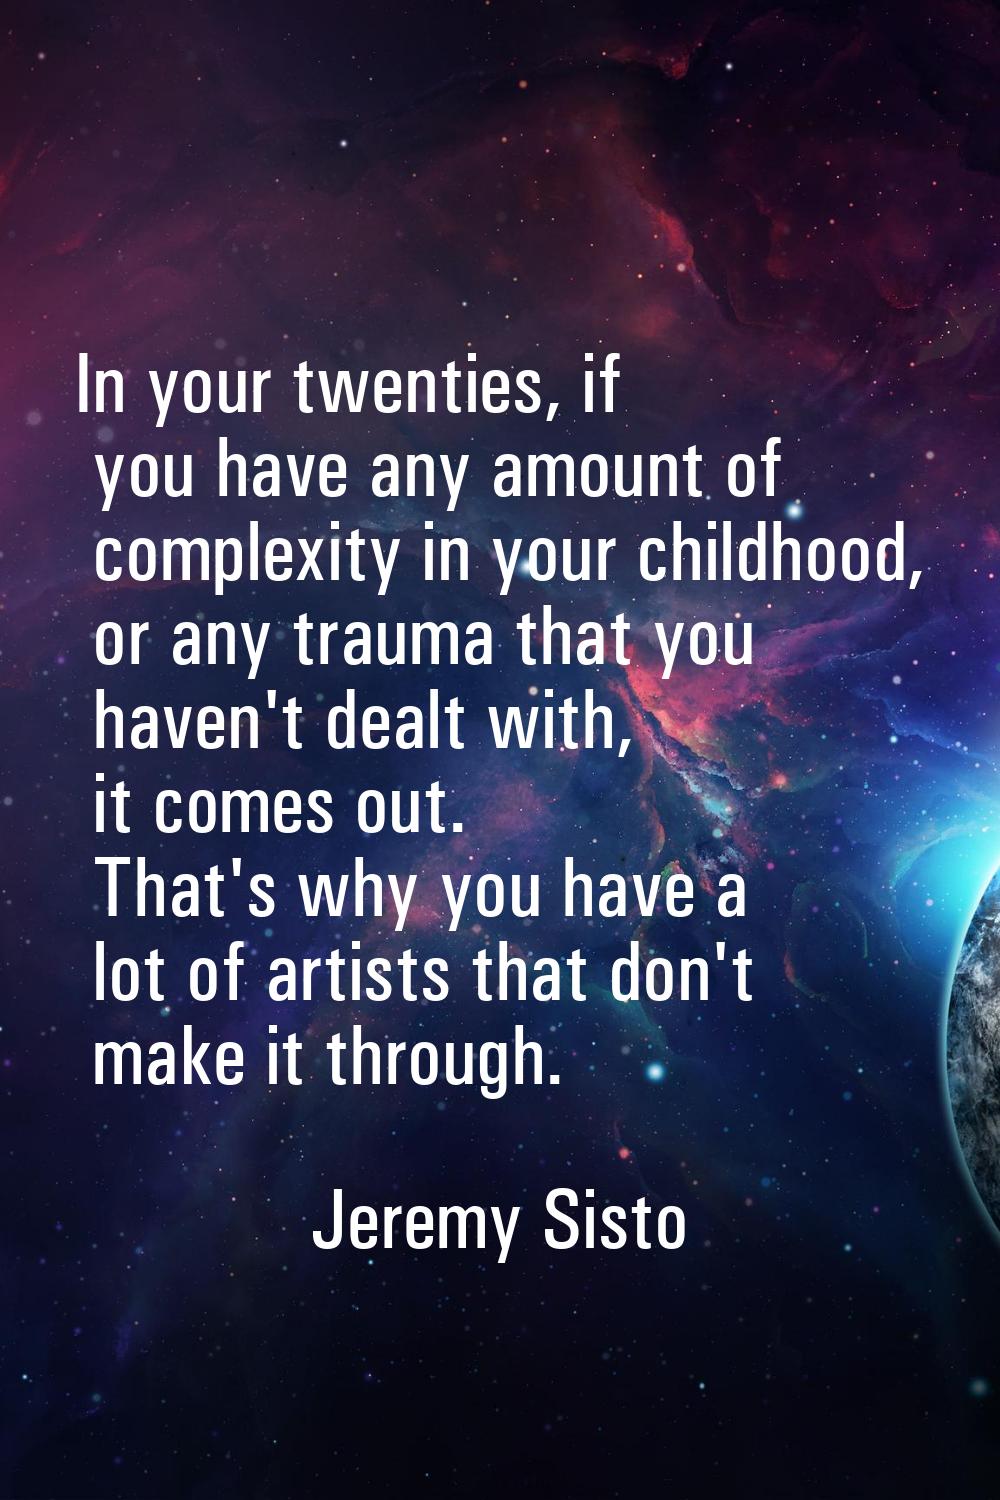 In your twenties, if you have any amount of complexity in your childhood, or any trauma that you ha